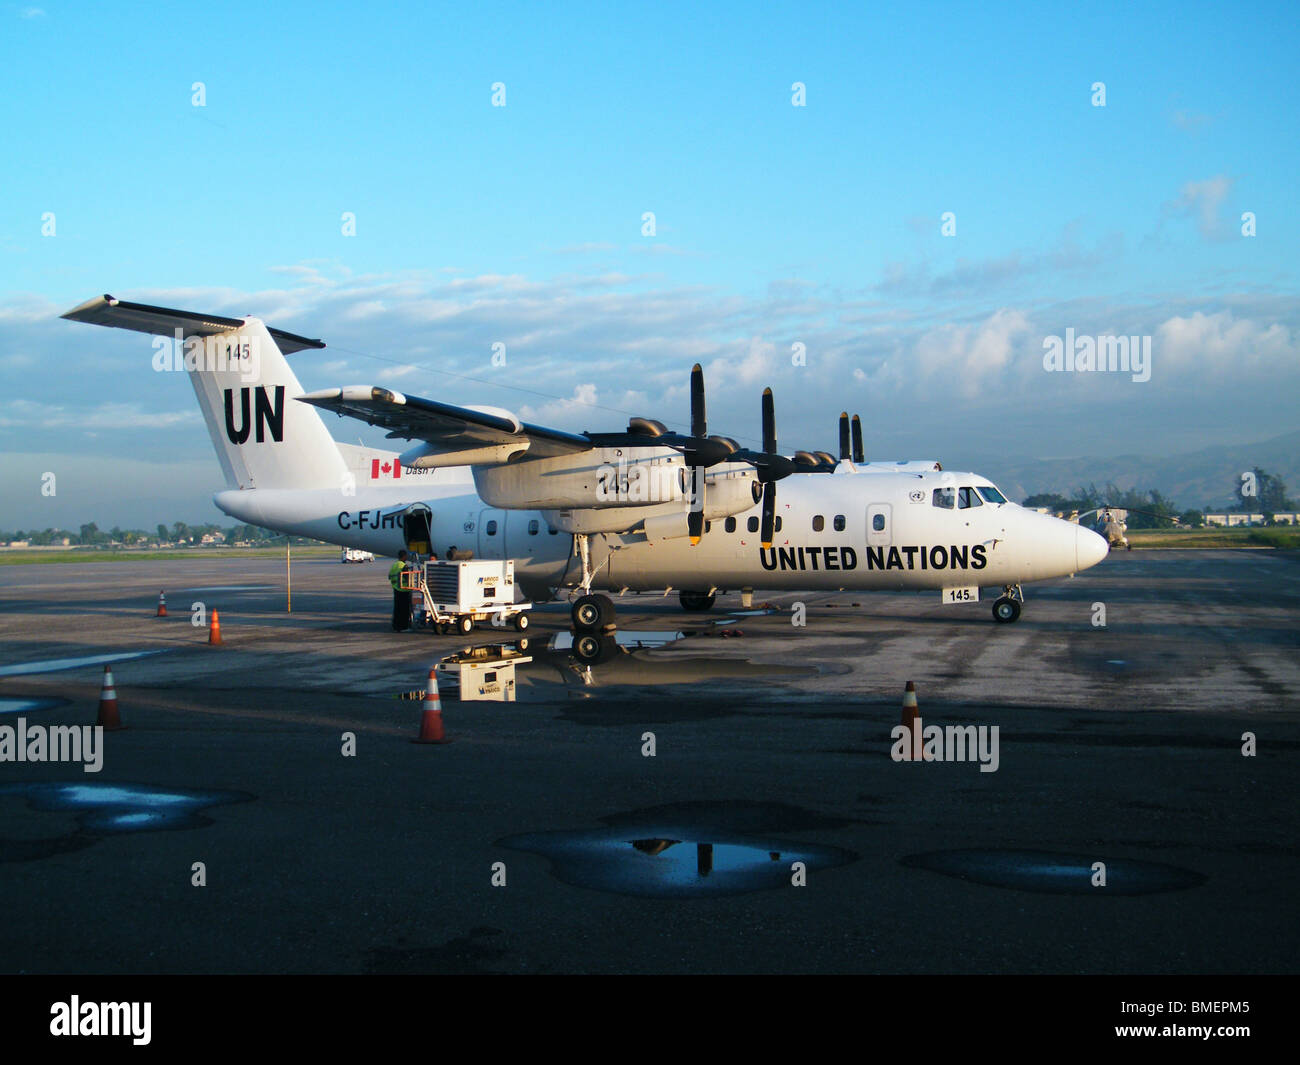 A canadian UN plane sits on the tarmac at the United Nations logistics base in Port au Prince, Haiti Stock Photo